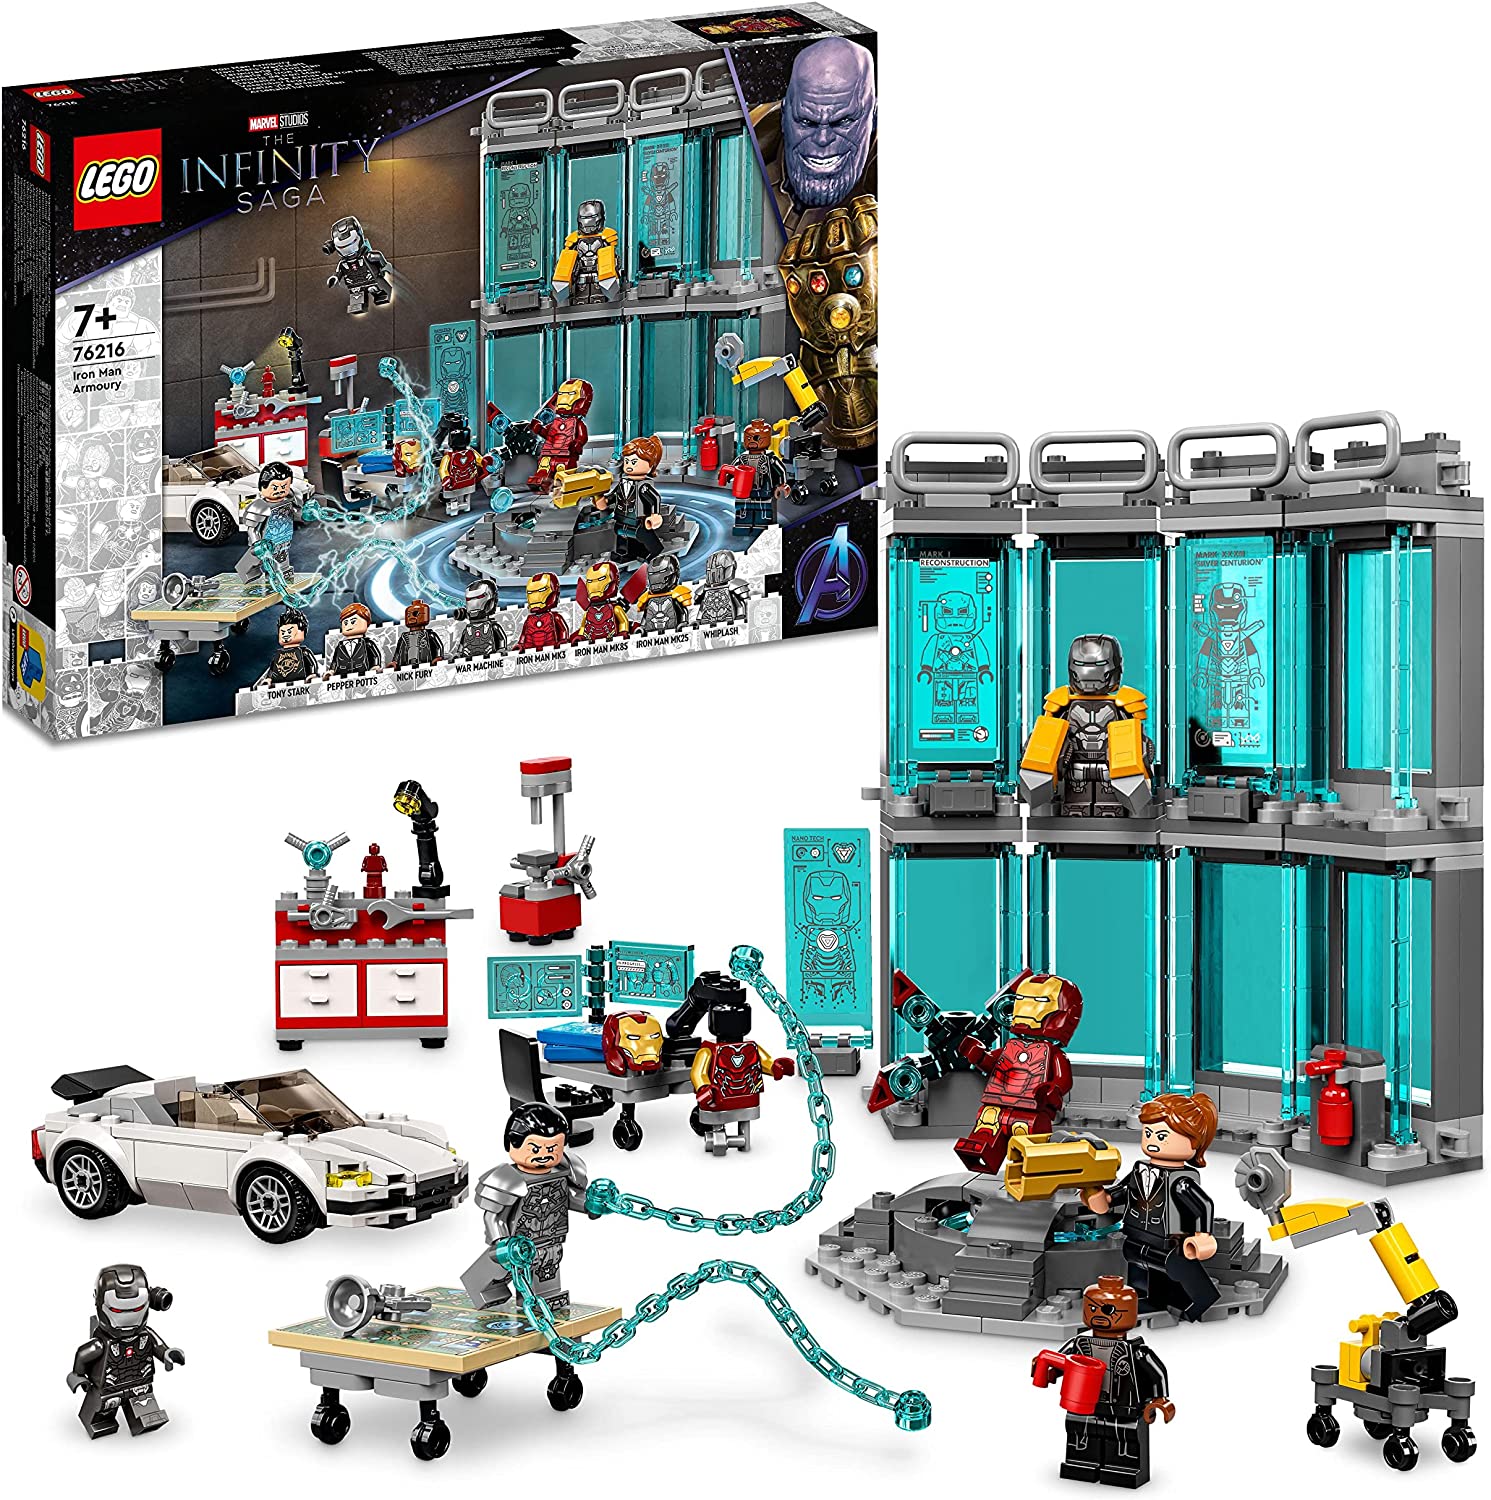 LEGO 76216 Marvel Iron Mans Workshop with Suits, Building Toy, Avengers Set with Minifigures, Gift for Children from 7 Years